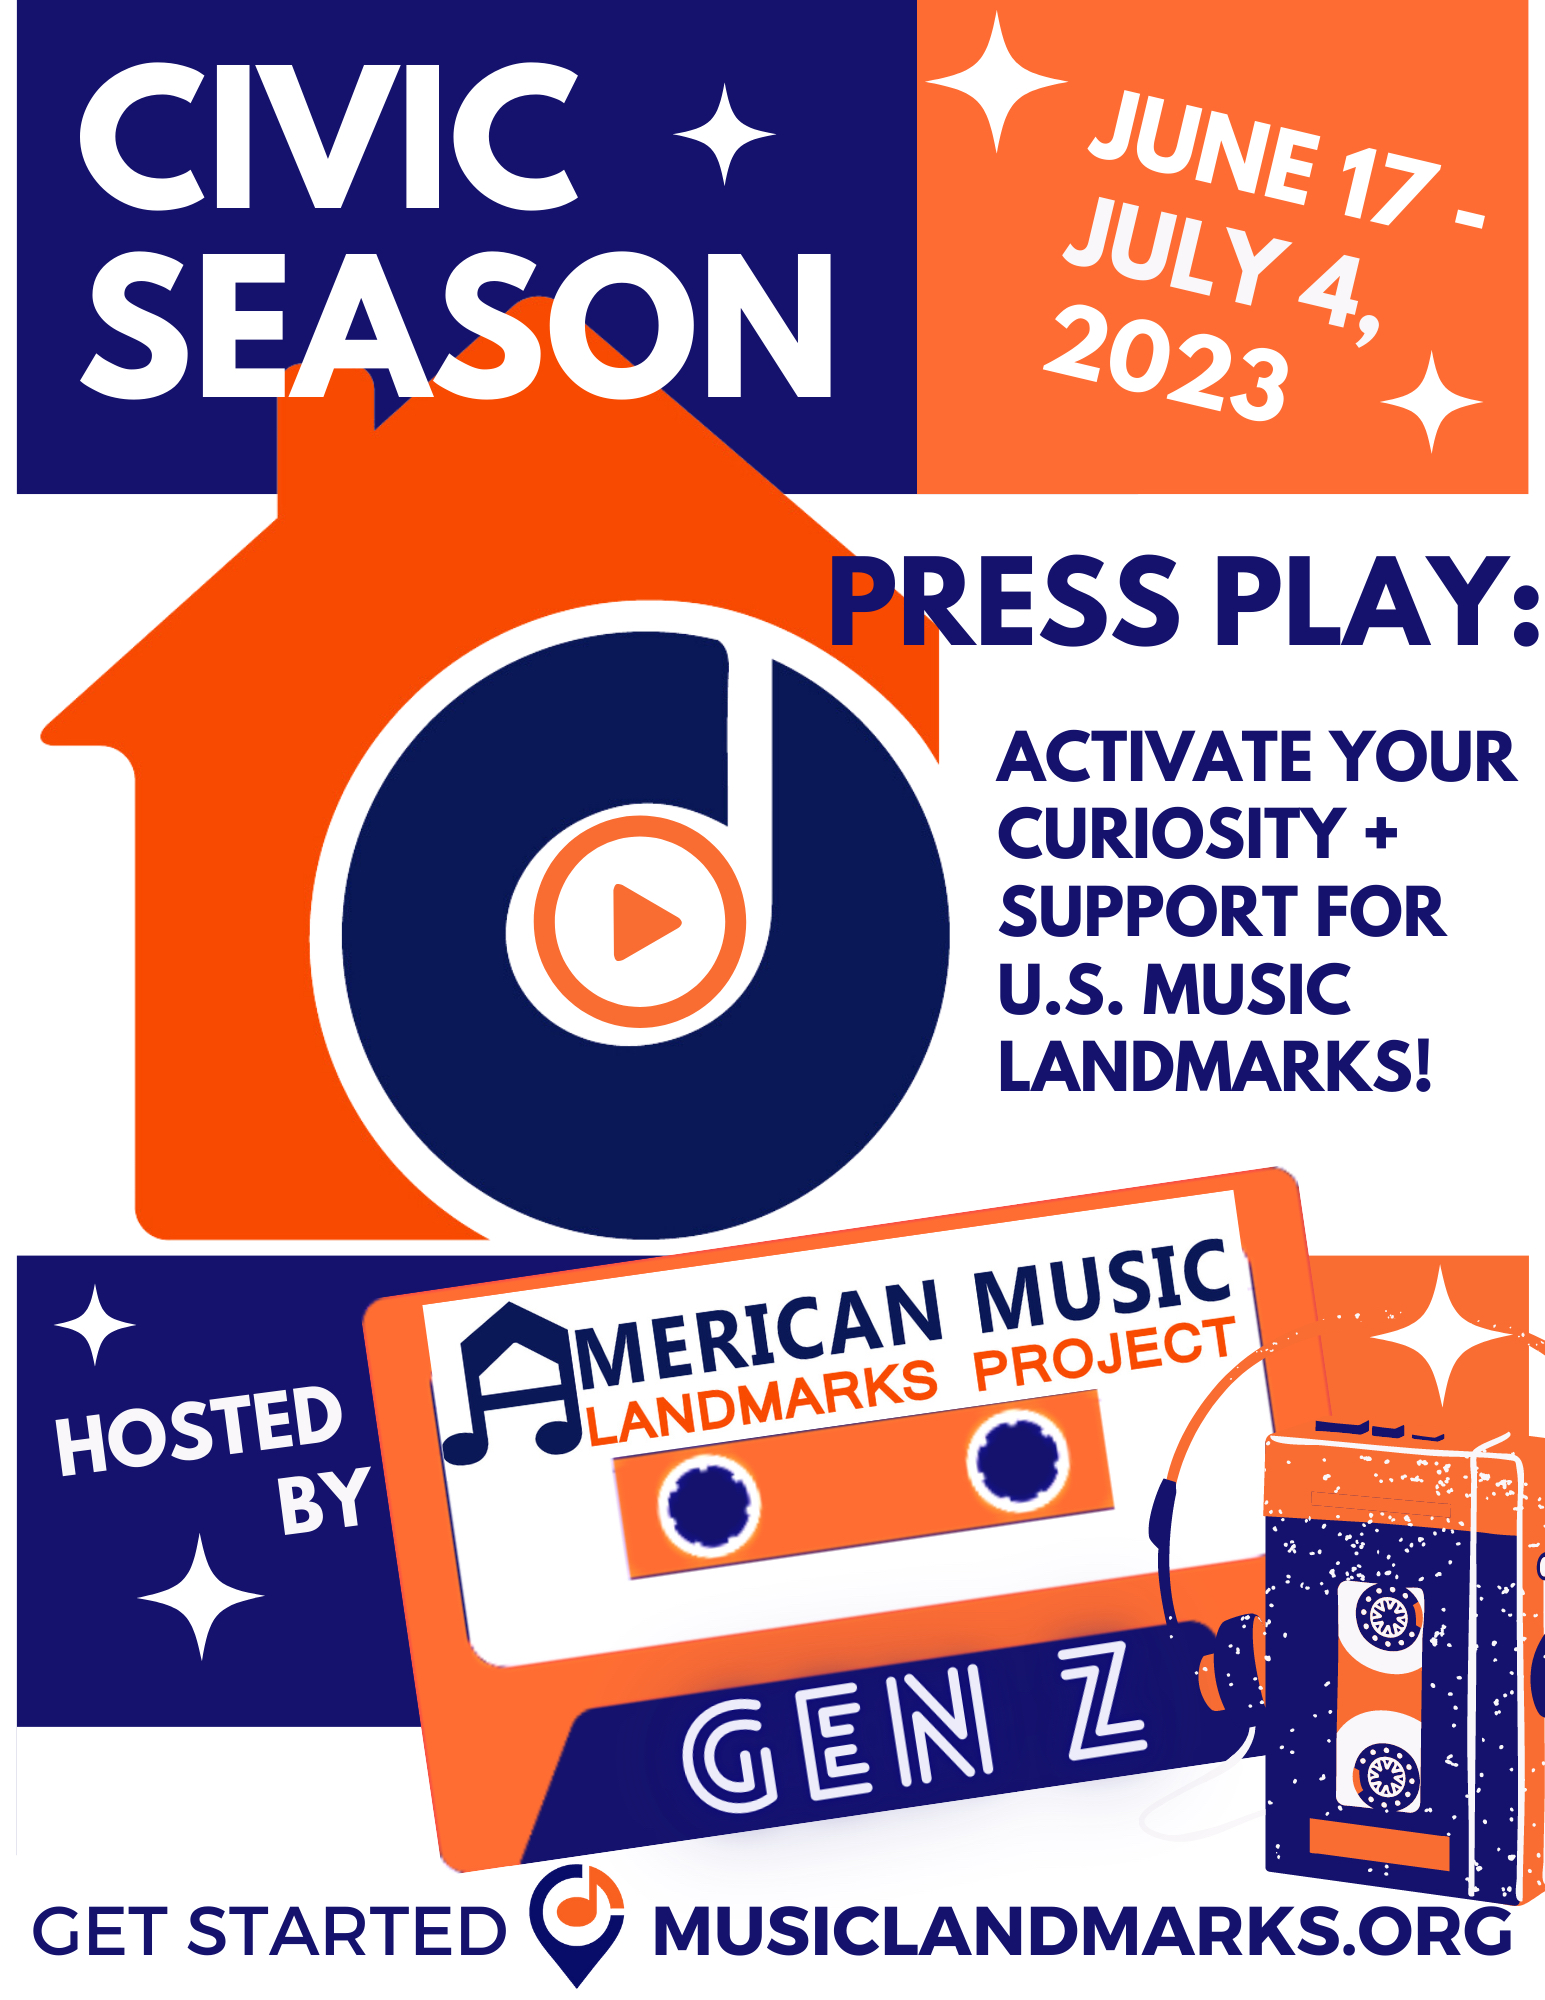 Press Play: Activate Your Curiosity + Support for U.S. Music Landmarks